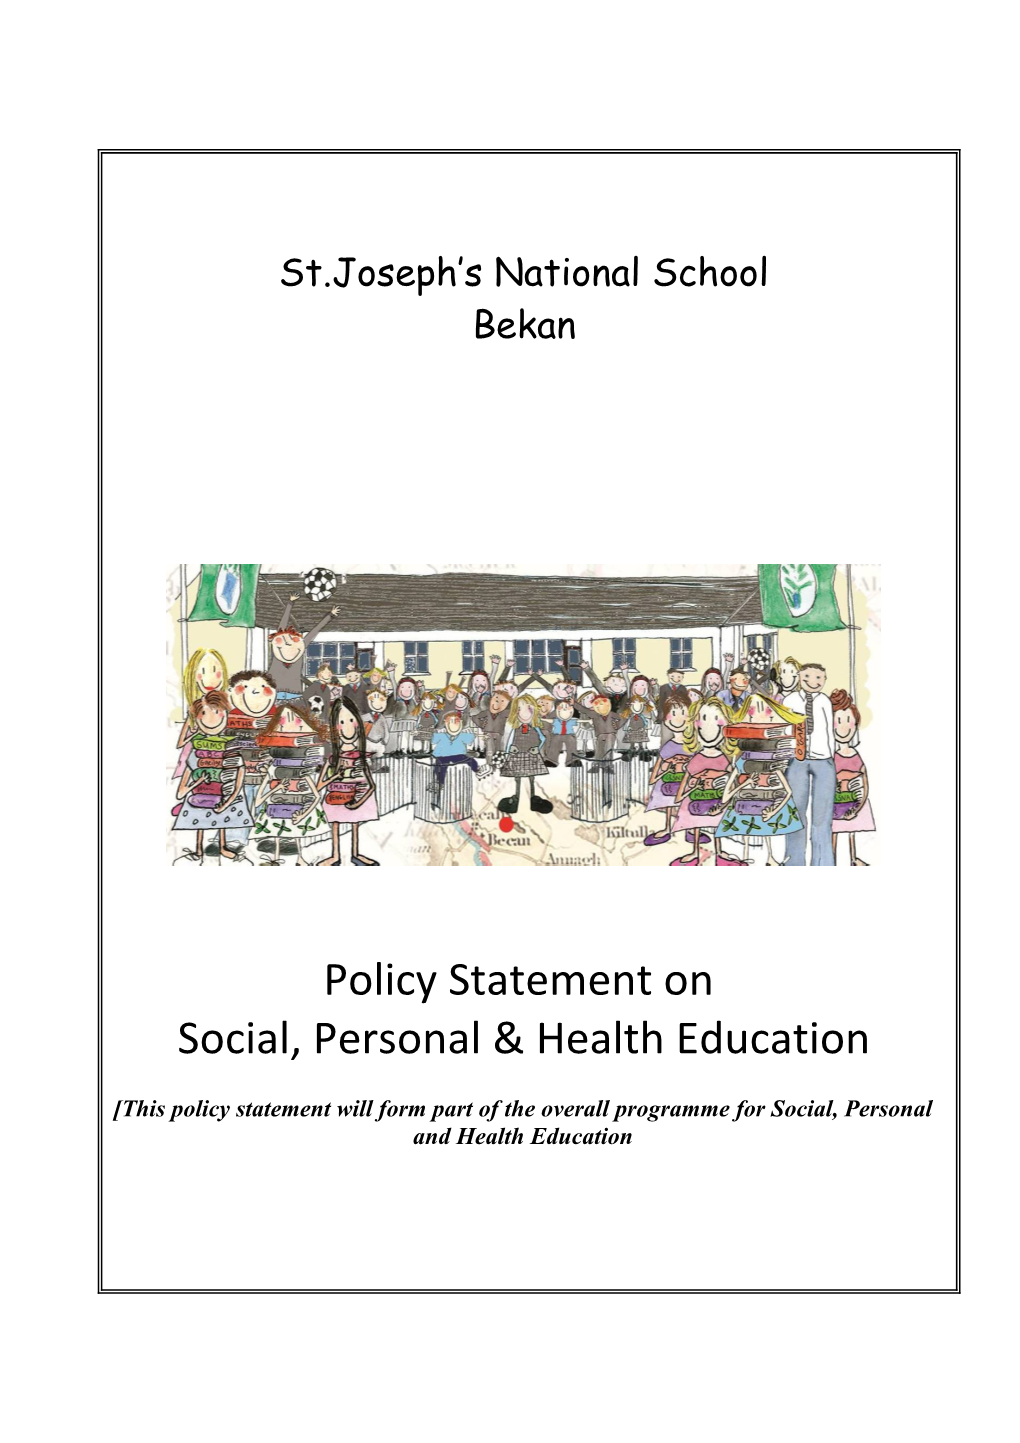 Policy for Relationships and Sexuality Education